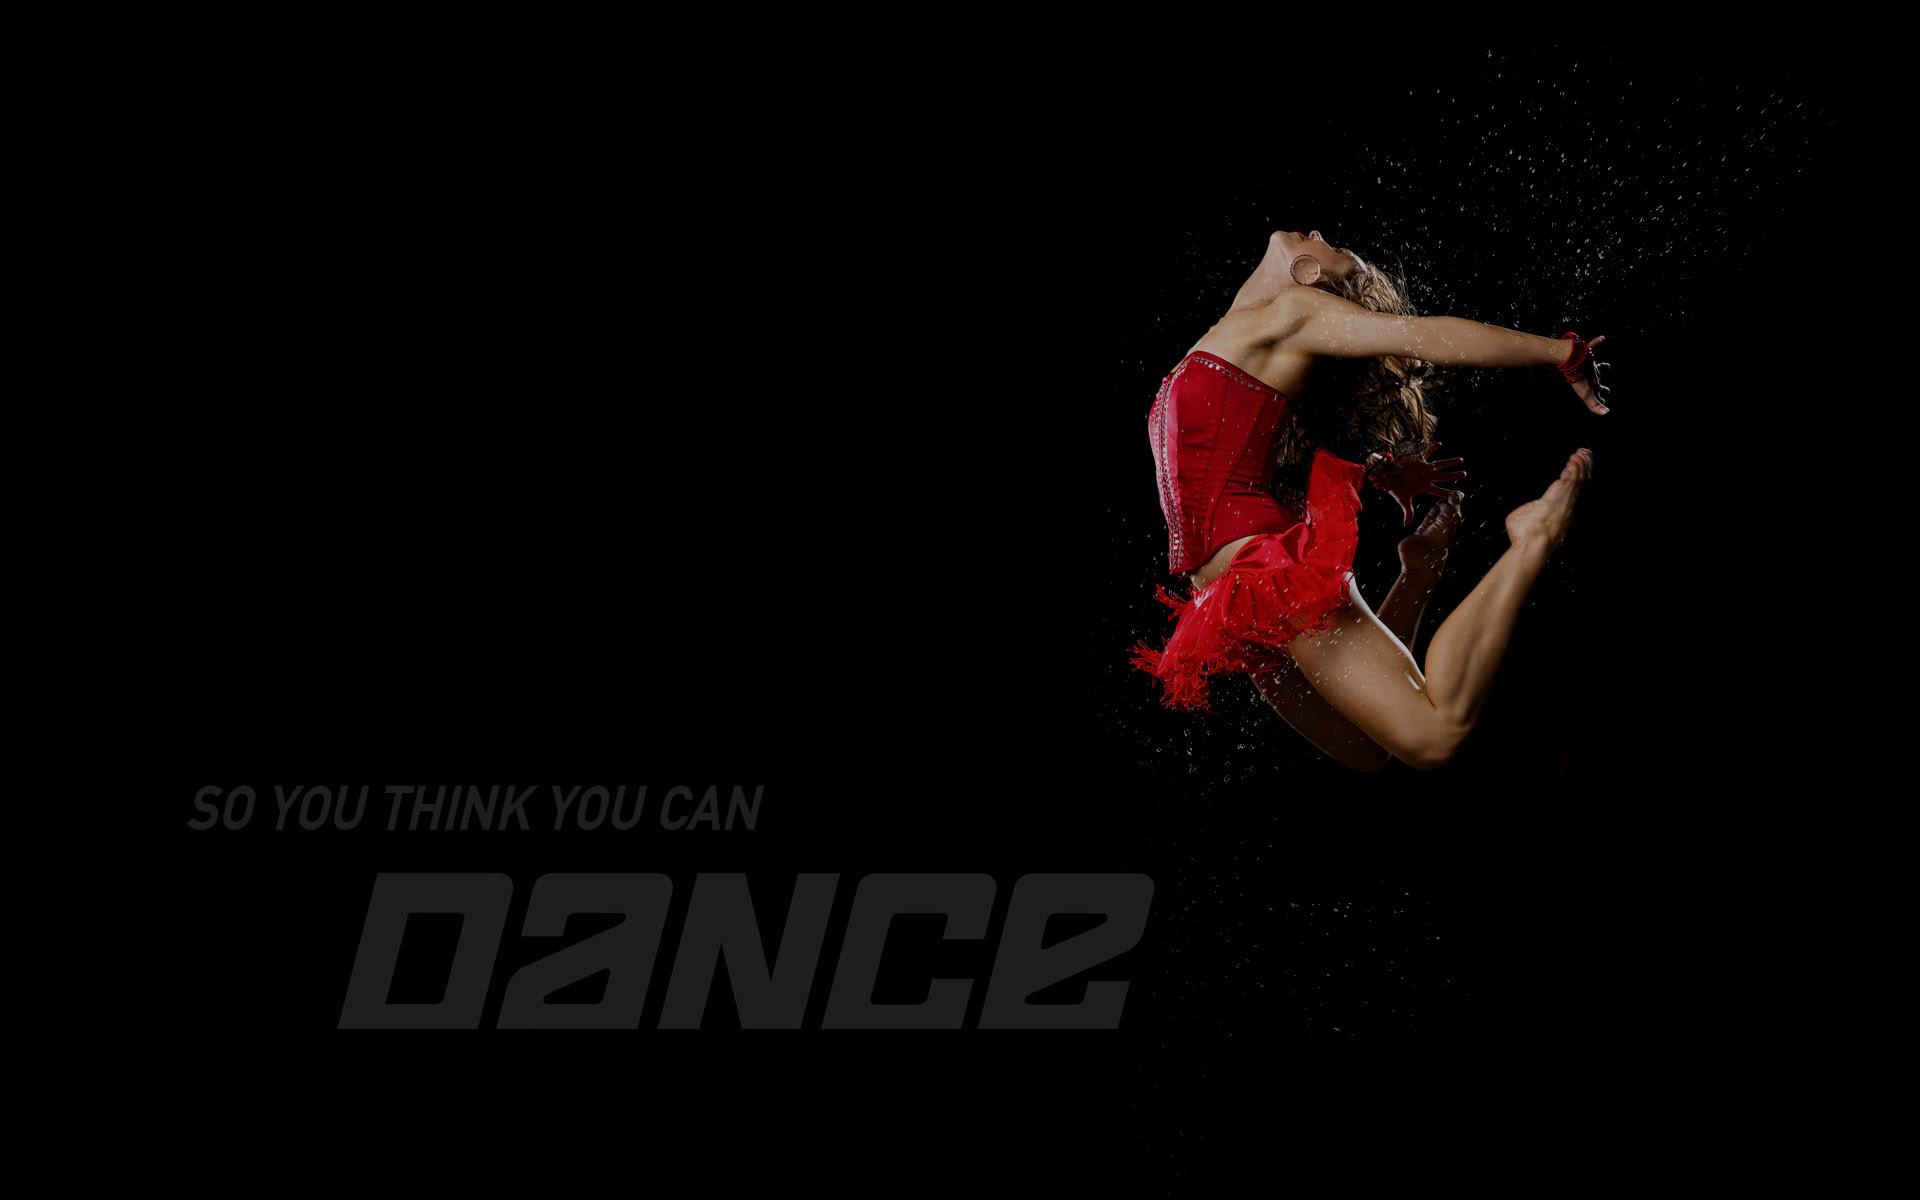 tv show, so you think you can dance, dance, dancer, dancing wallpapers for tablet